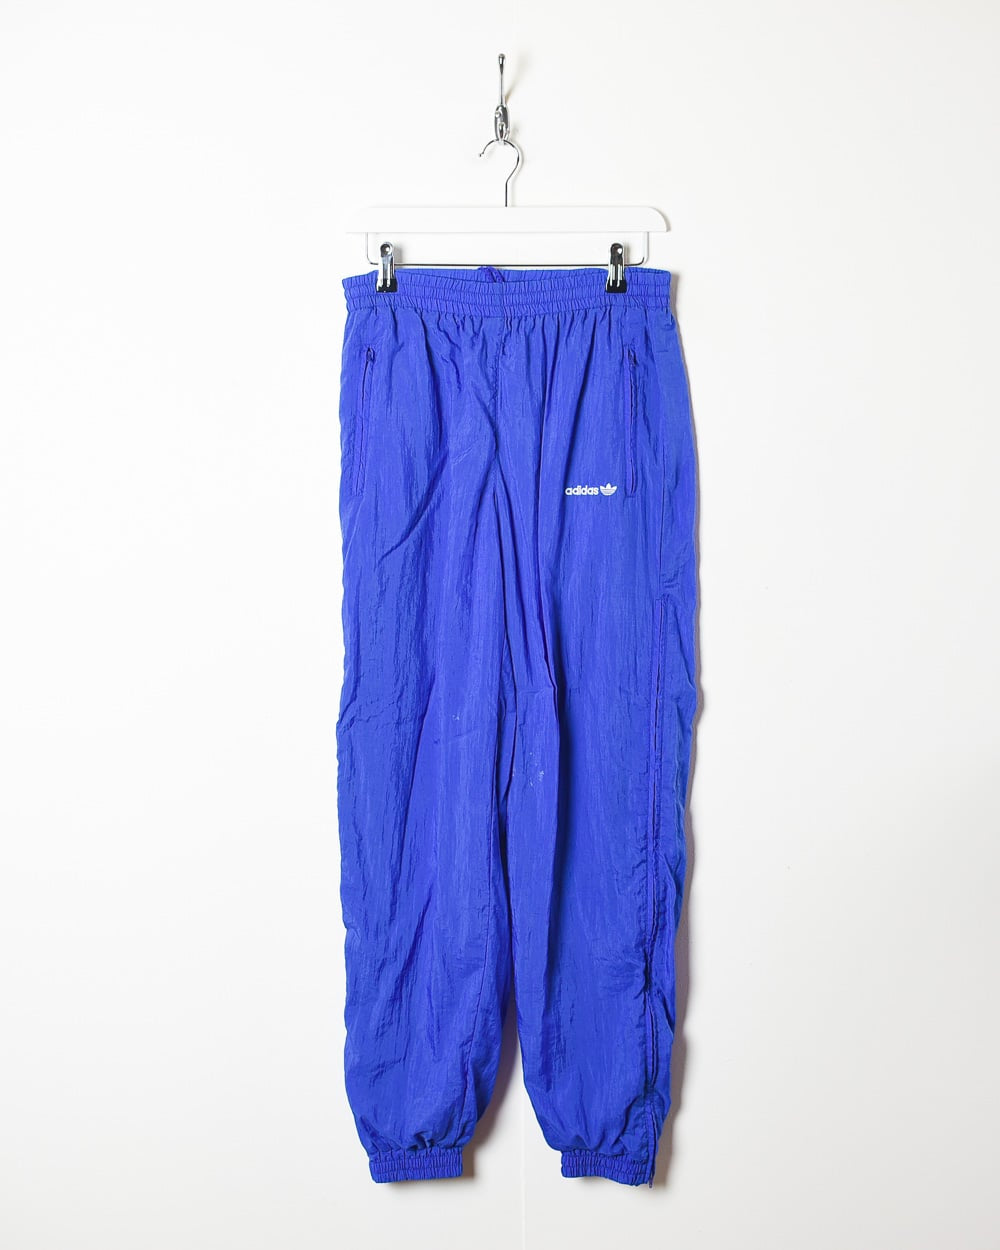 Blue Adidas Tracksuit Bottoms - Small